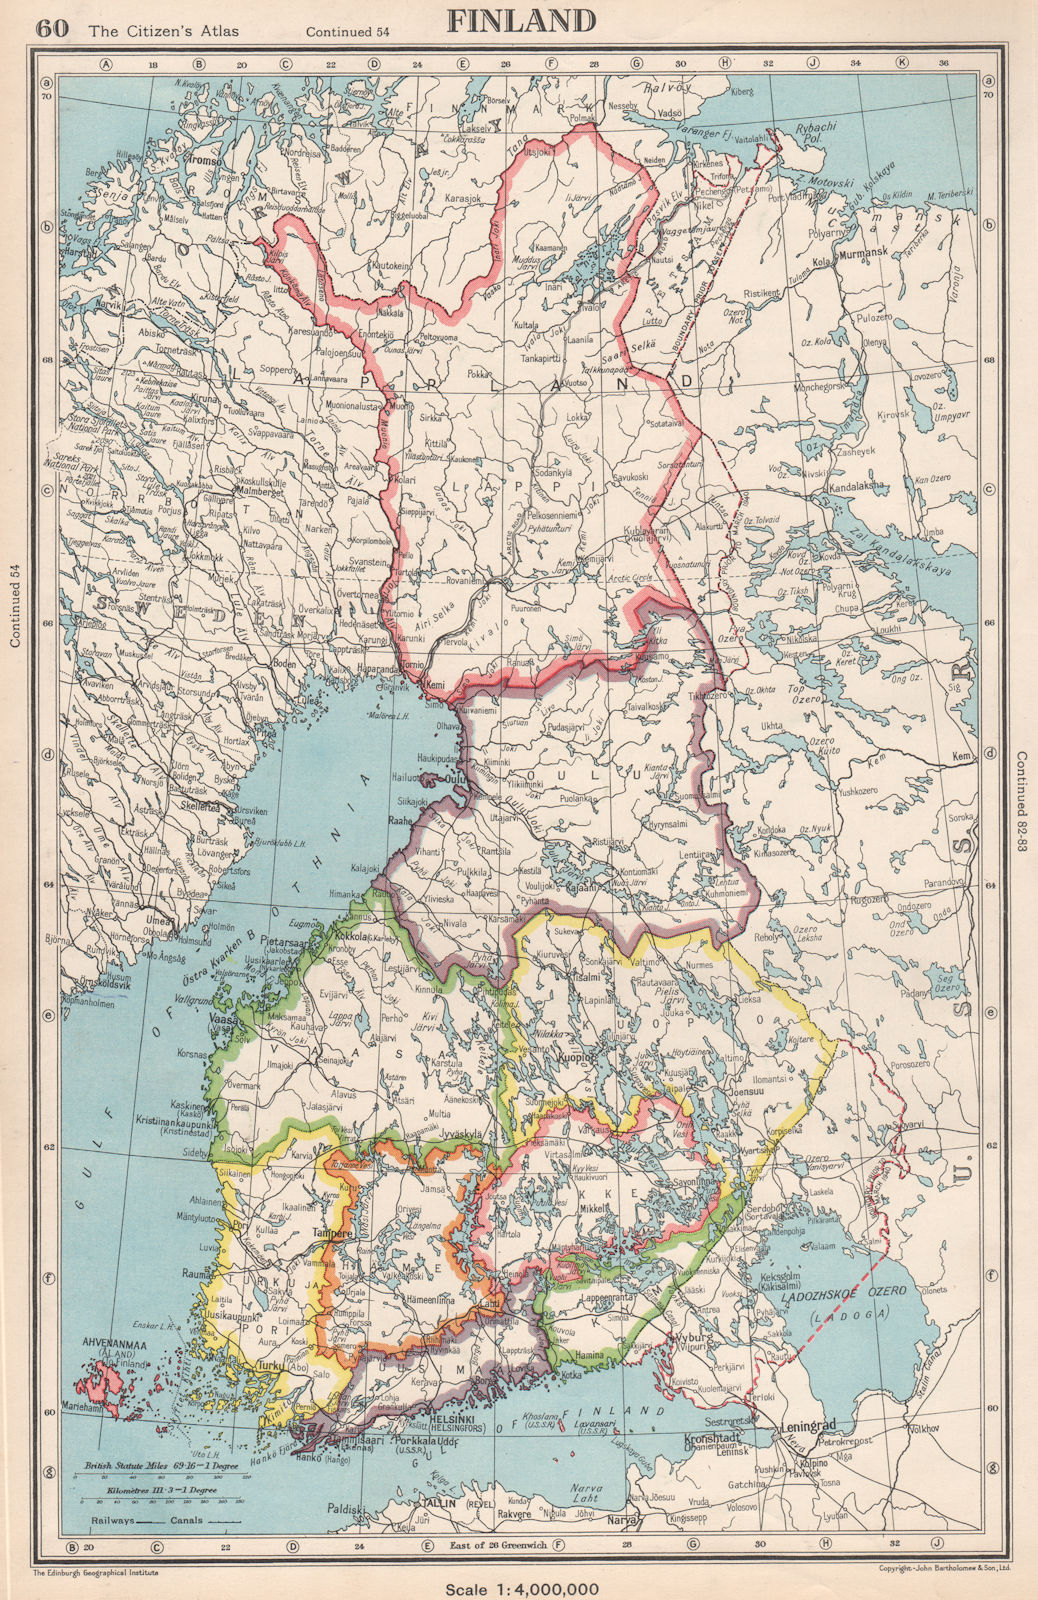 FINLAND. showing provinces. Also shows pre-1940 borders/changes 1952 old map